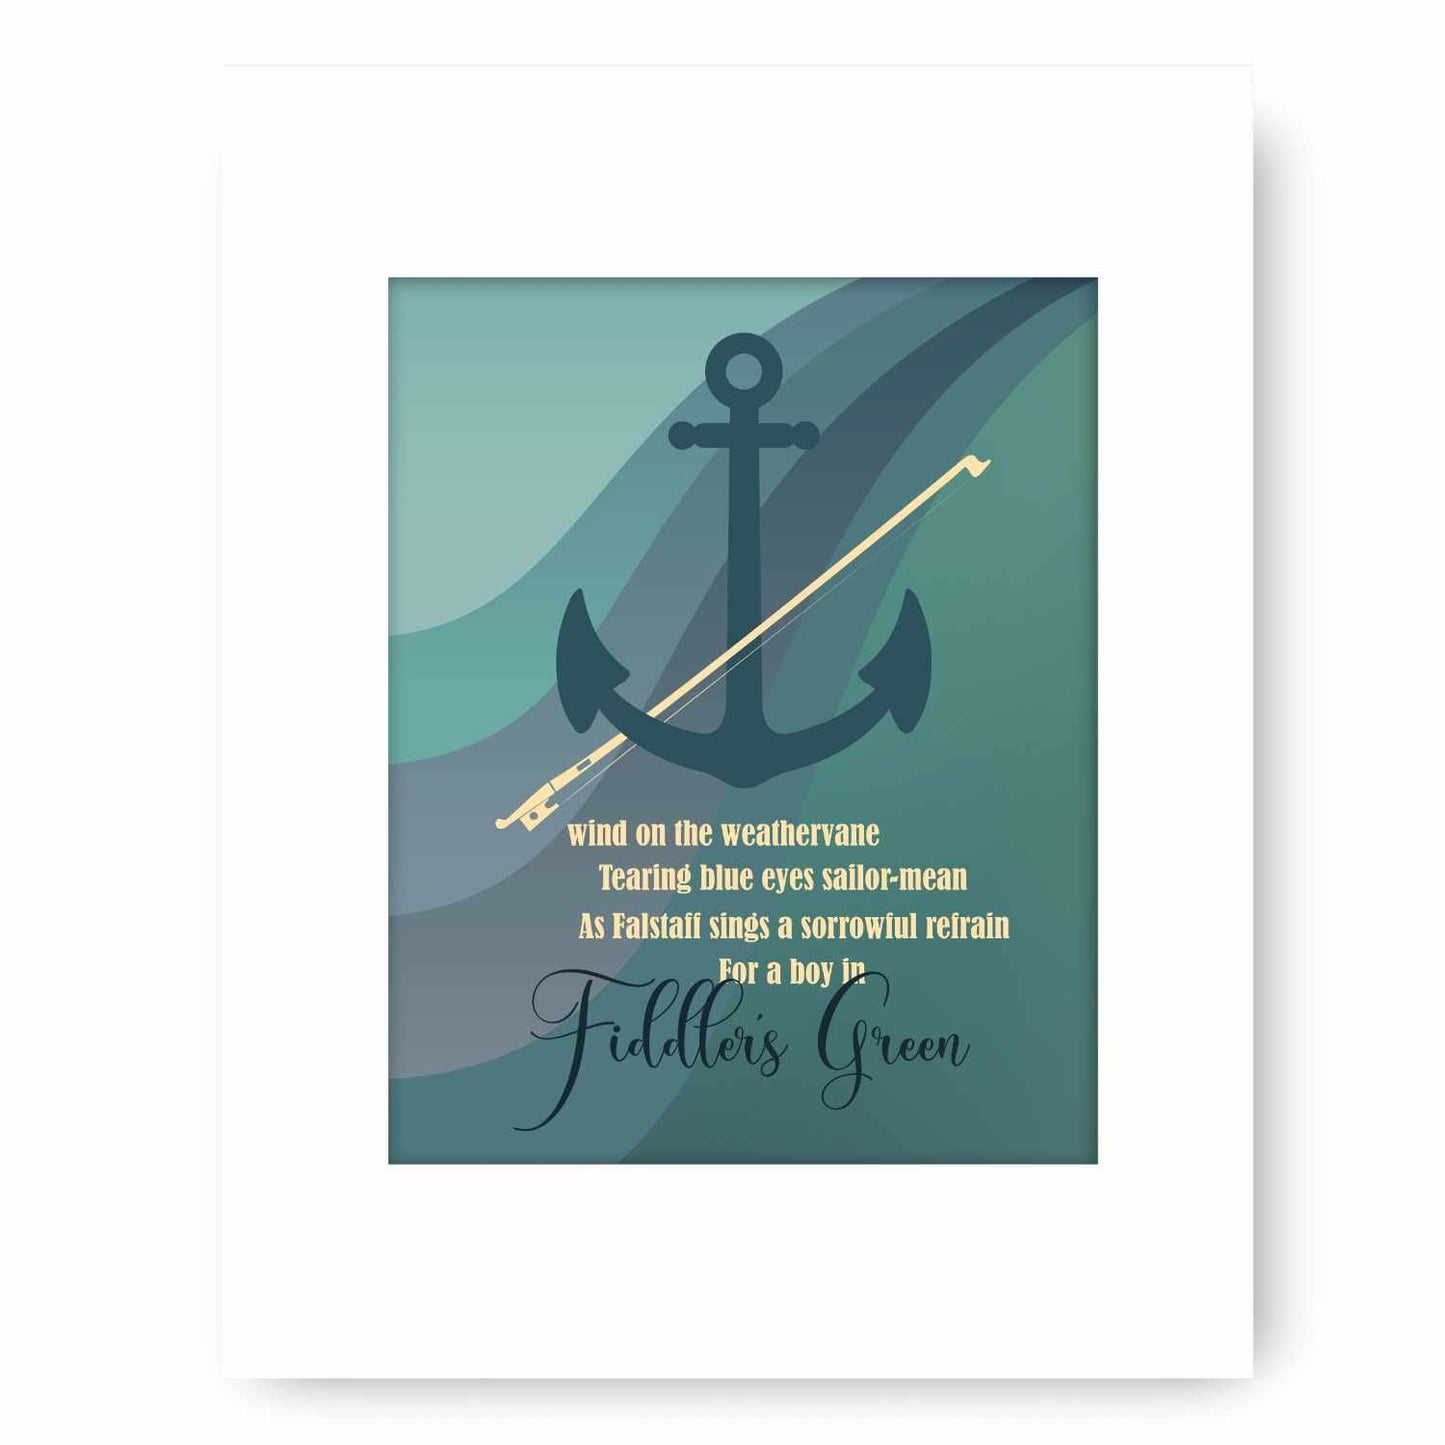 Fiddlers Green by Tragically Hip - Song Lyric Music Wall Art Song Lyrics Art Song Lyrics Art 8x10 White Matted Print 